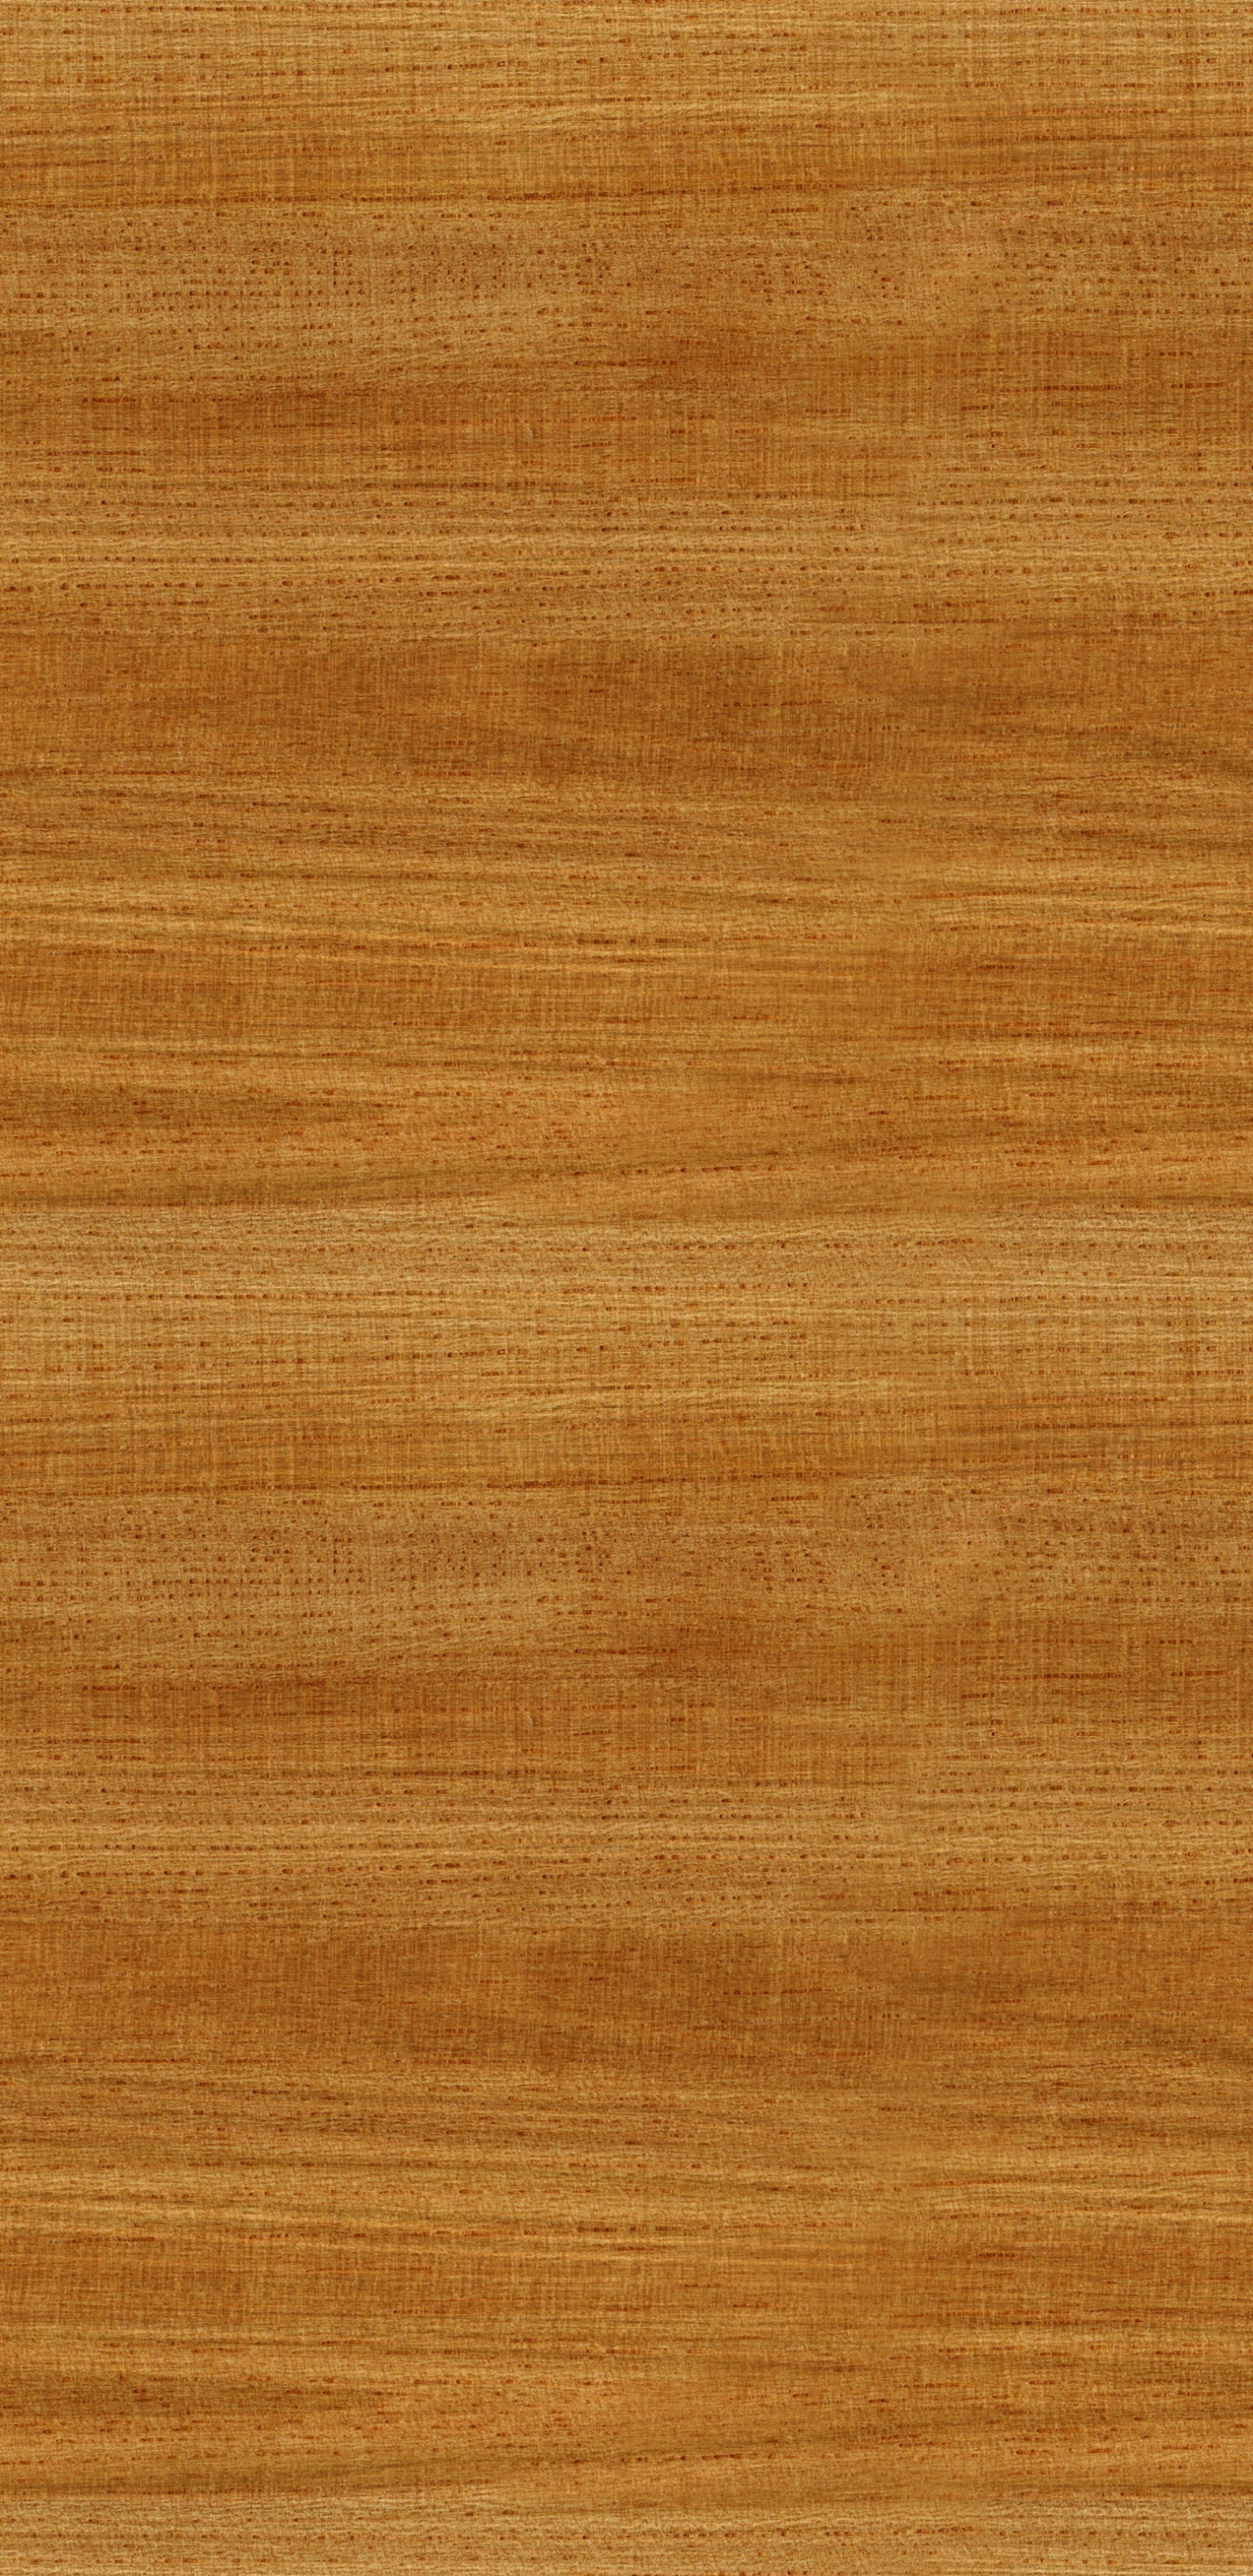 Brown Wooden Table With White Paper. Wallpaper in 1440x2960 Resolution